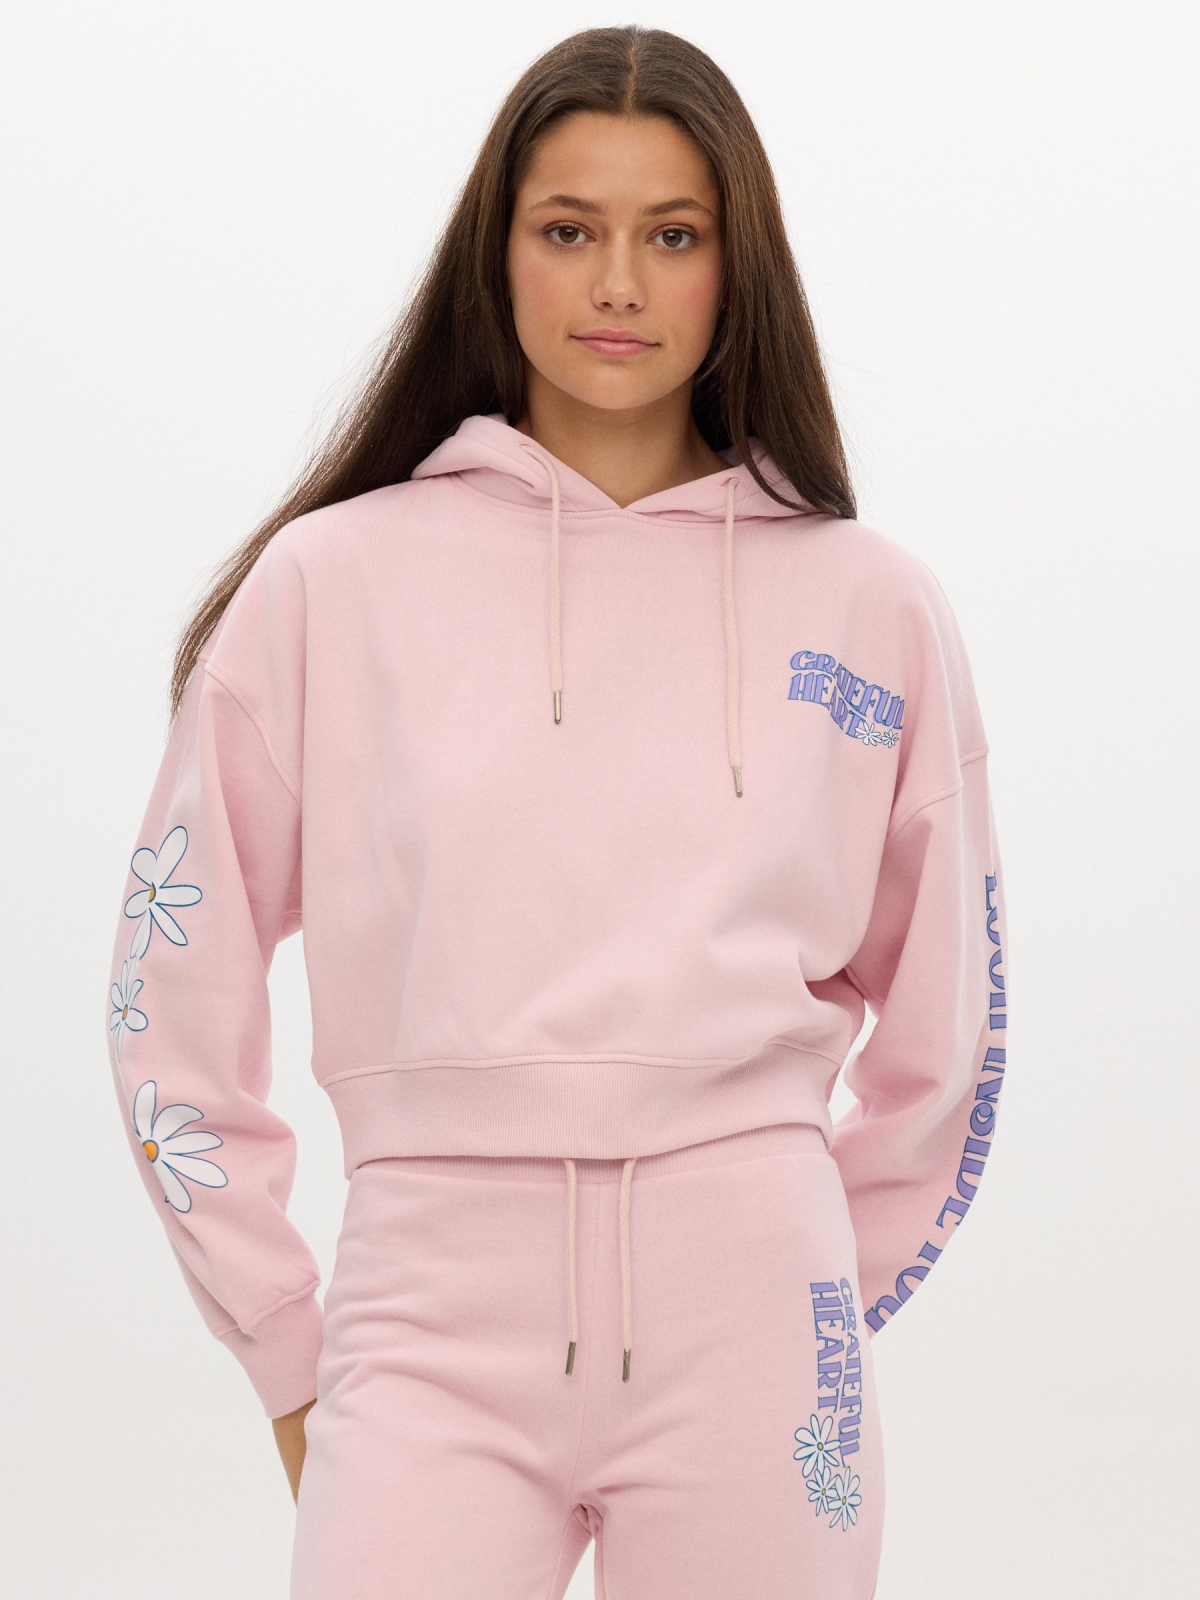 Printed hooded sweatshirt light pink middle front view